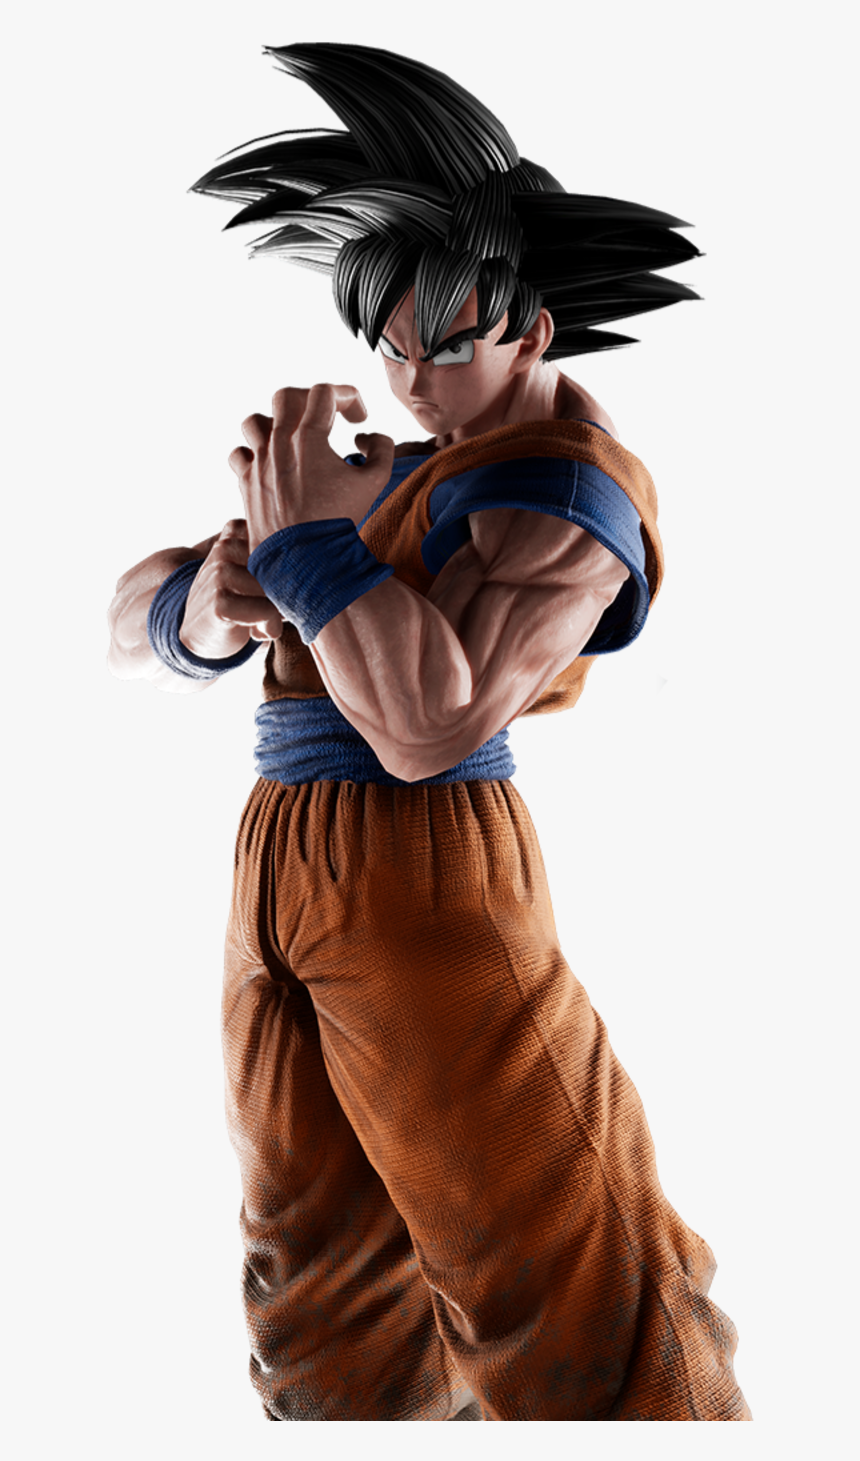 jump force character png transparent png kindpng jump force character png transparent